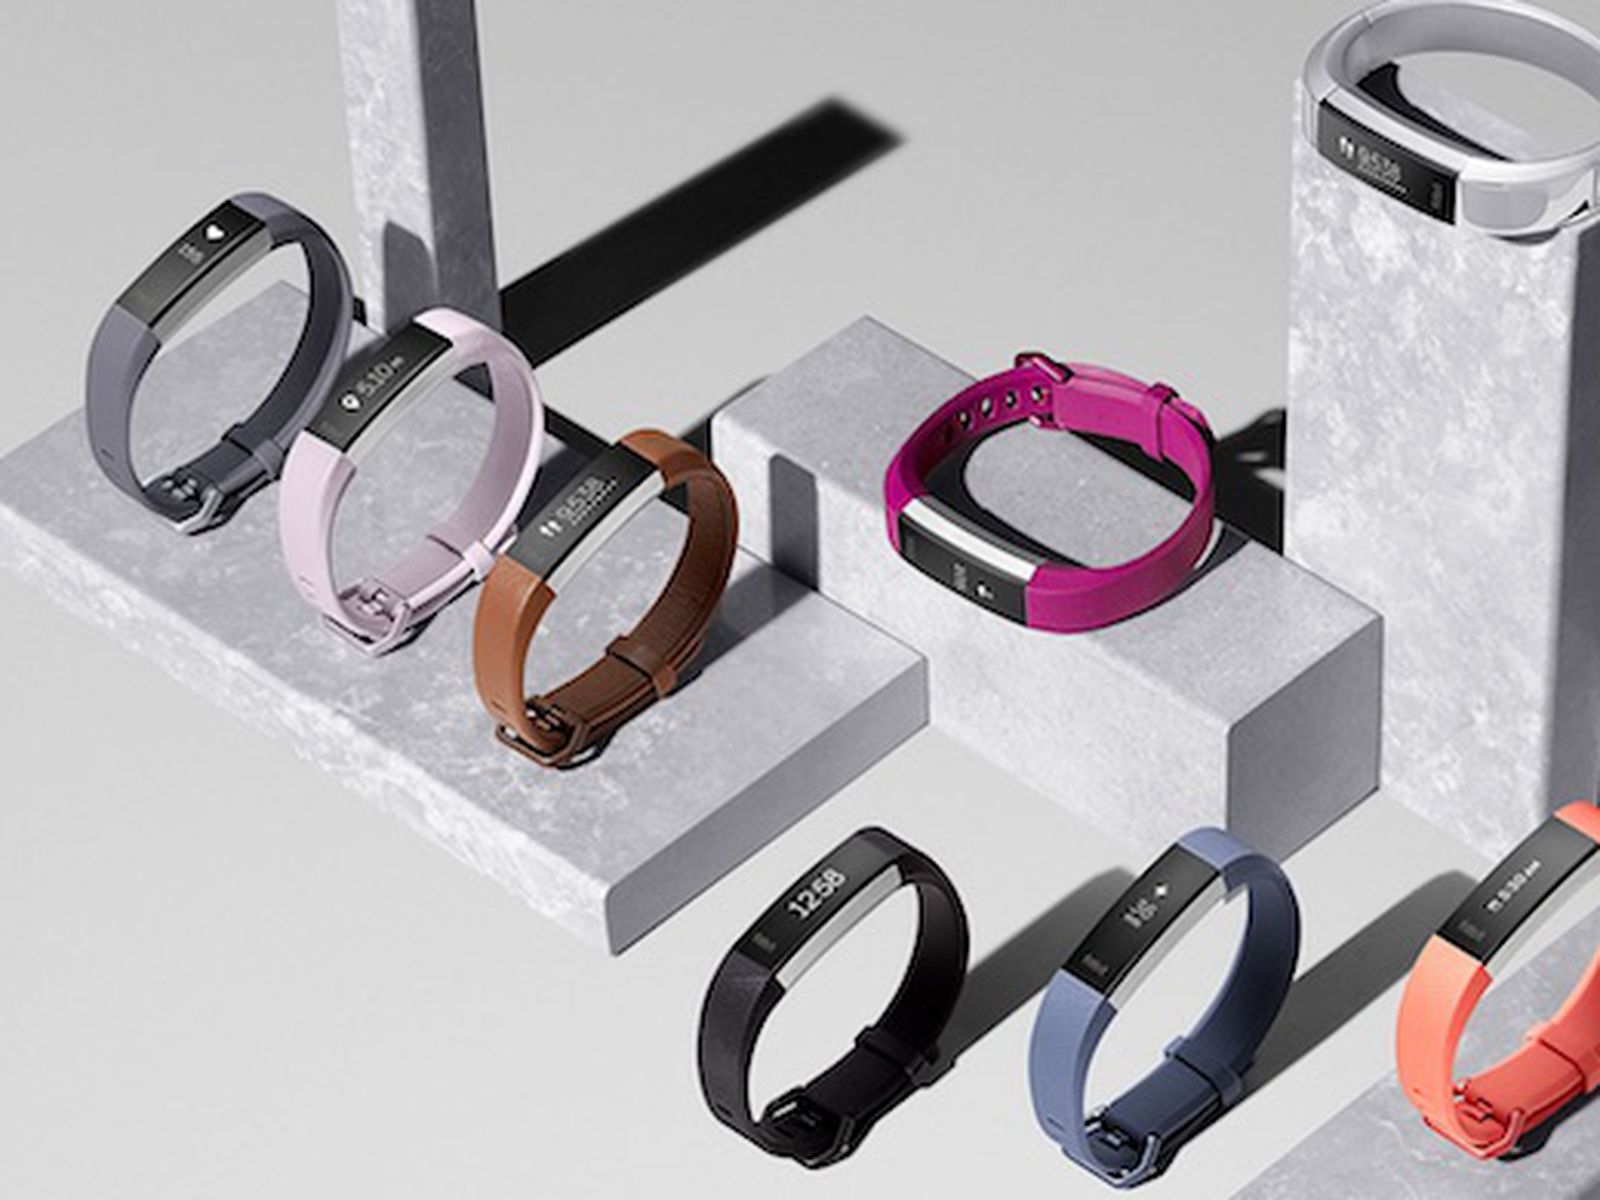 Fitbit Announces Fitbit Alta Hr Wearable With Continuous Heart Rate Tracking In Slim Band Macrumors